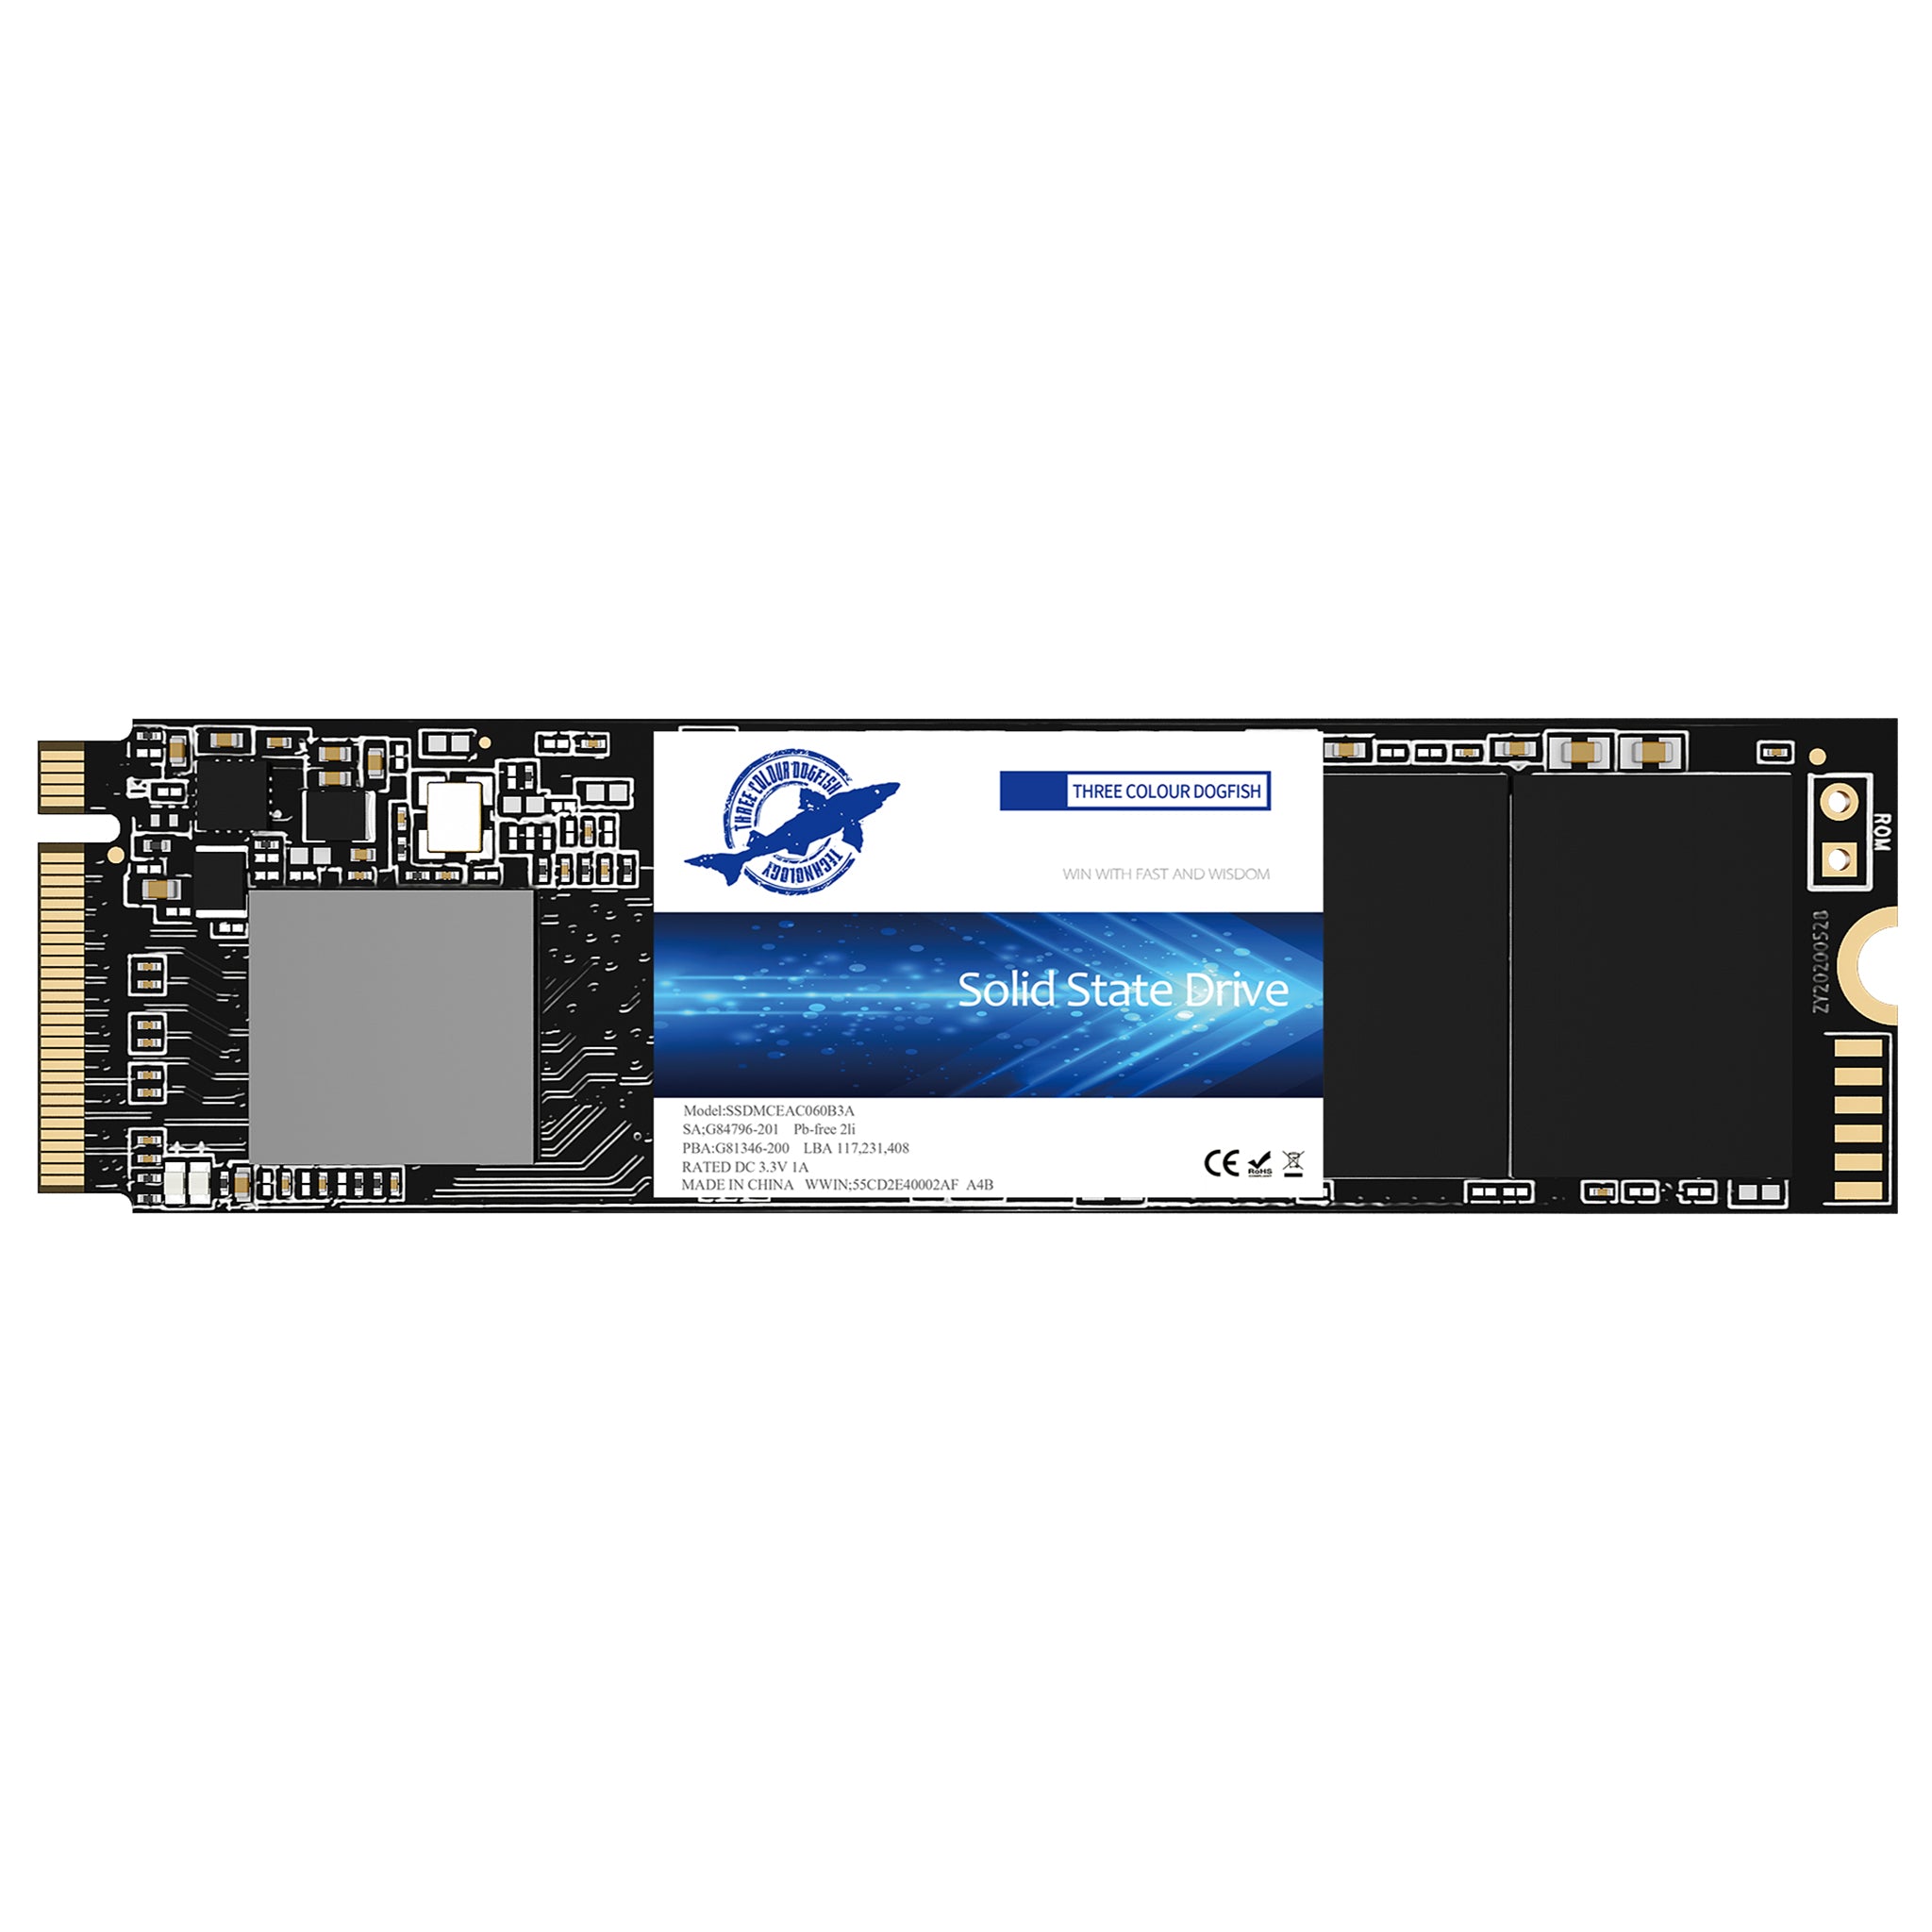 DOGFISH M.2 2230 SSD PCIe4.0 Great for Steam Deck and Microsoft